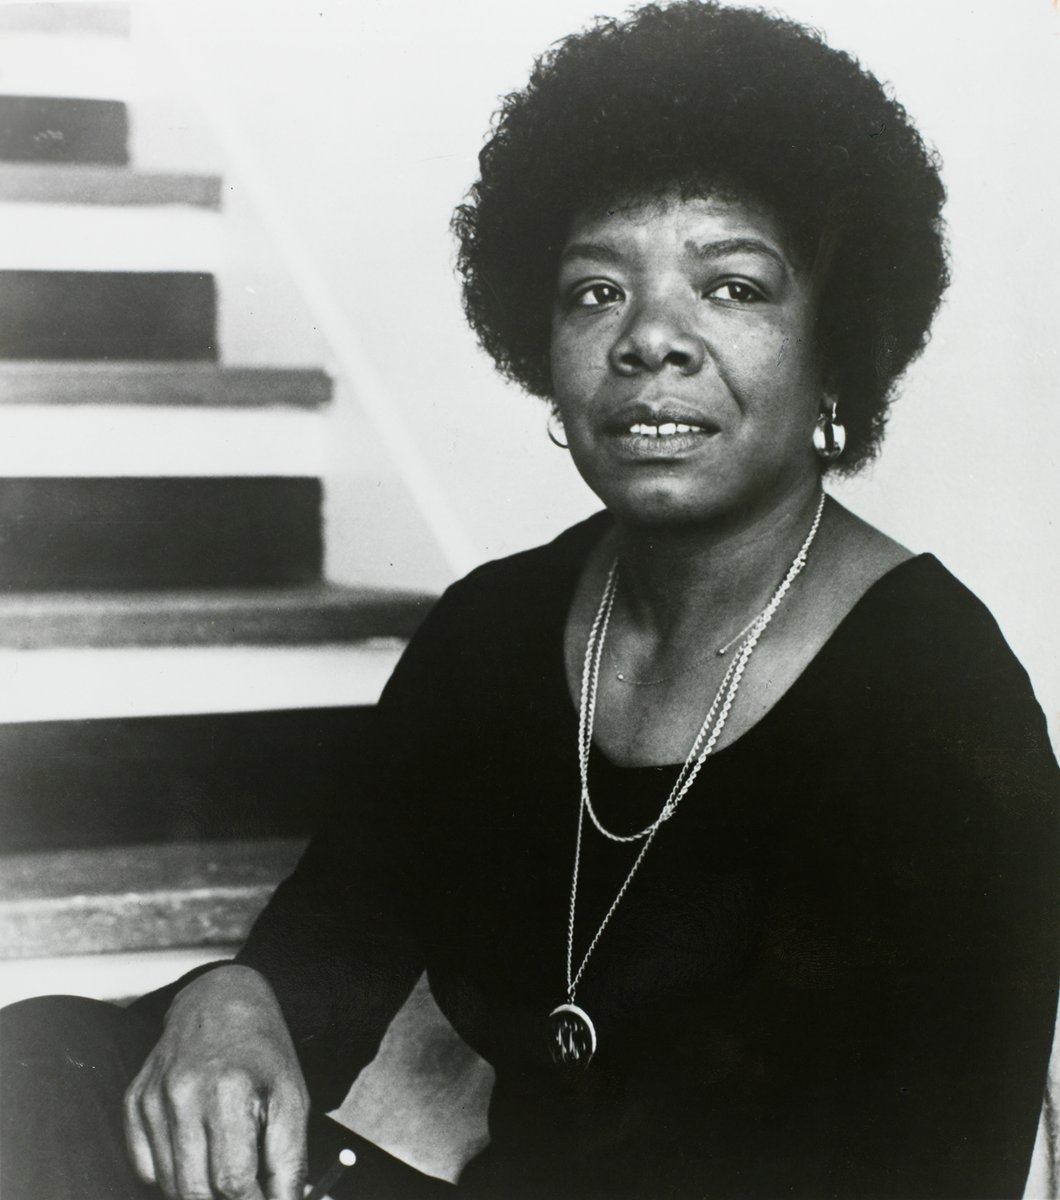 Title: Maya Angelou | Photographer: Susan Mullally Well | Source: Burns Library | License: CC BY NC-ND 2.0